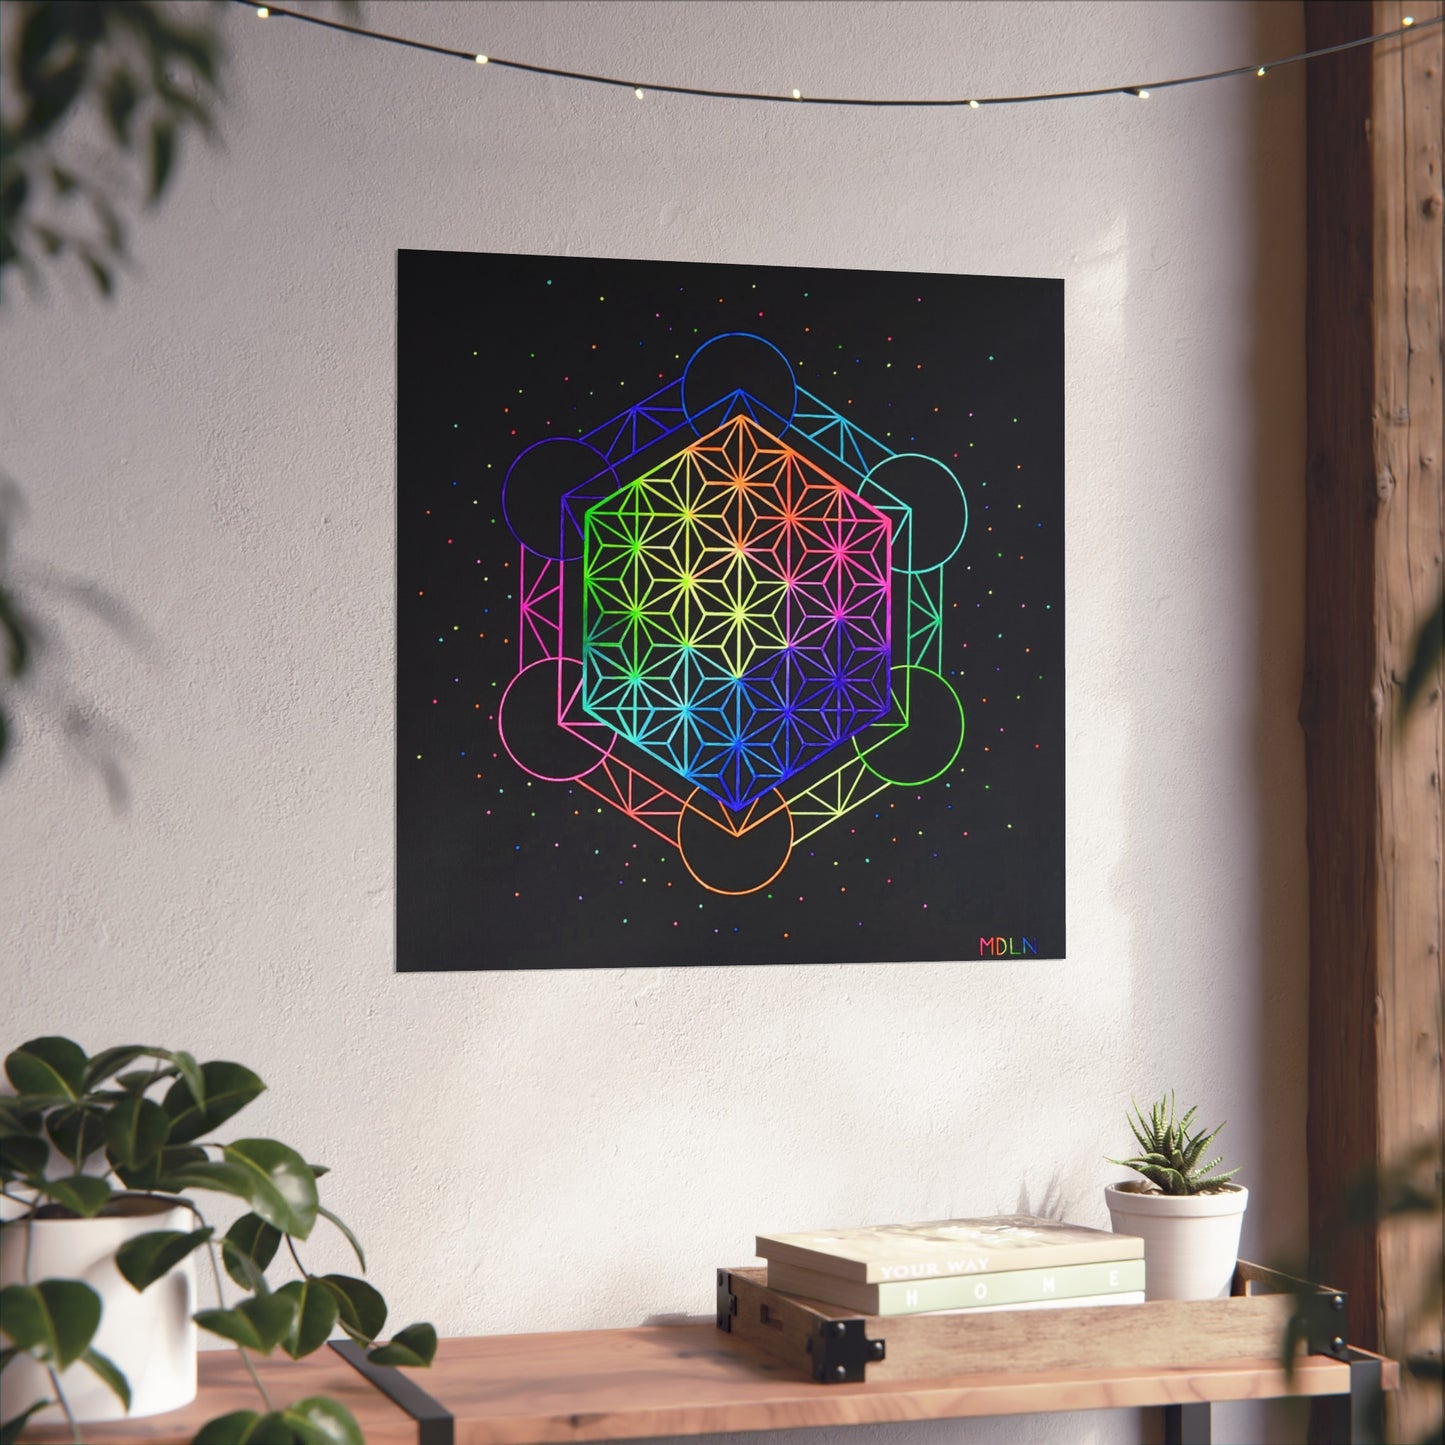 A beautiful sacred geometry giclee art print of Metatrons cube sacred geometry overlayed with the flower of life sacred geometry mandala, hanging on a wall over a wooden table next to a plant